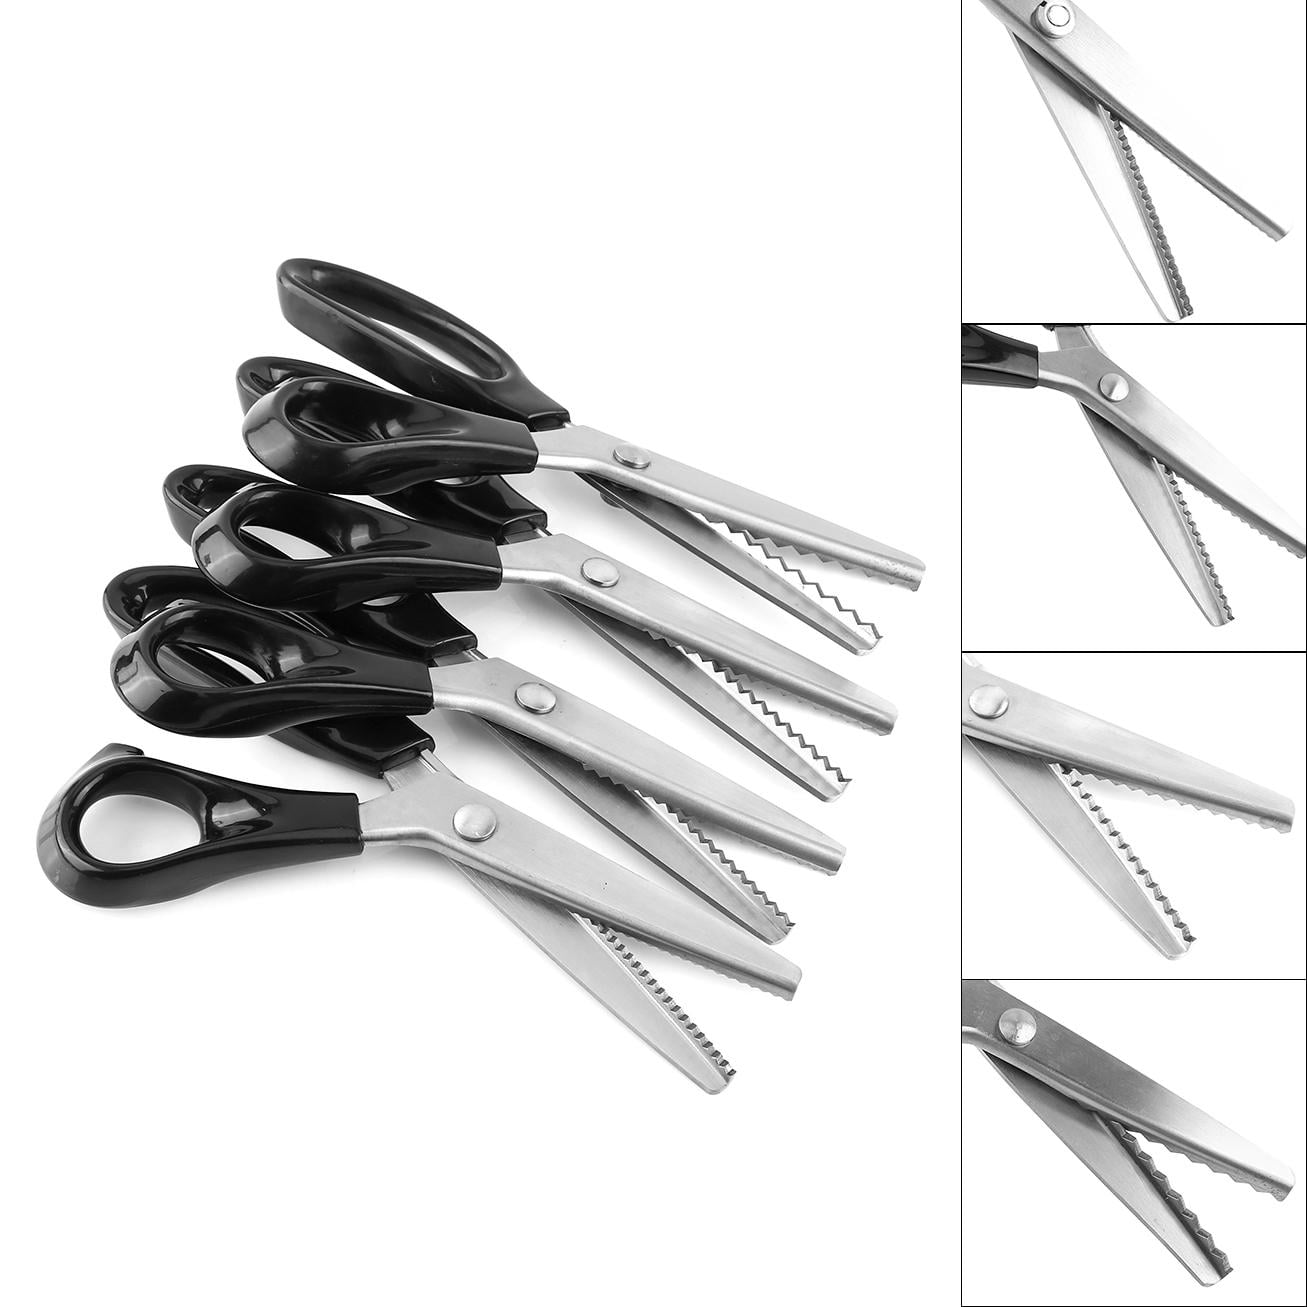 Fabric Pinking Shears Craft Scissors,Serrated Scalloped Stainless Steel Handled Professional Sewing Black Scissors, Scissors for Leather, Tailoring